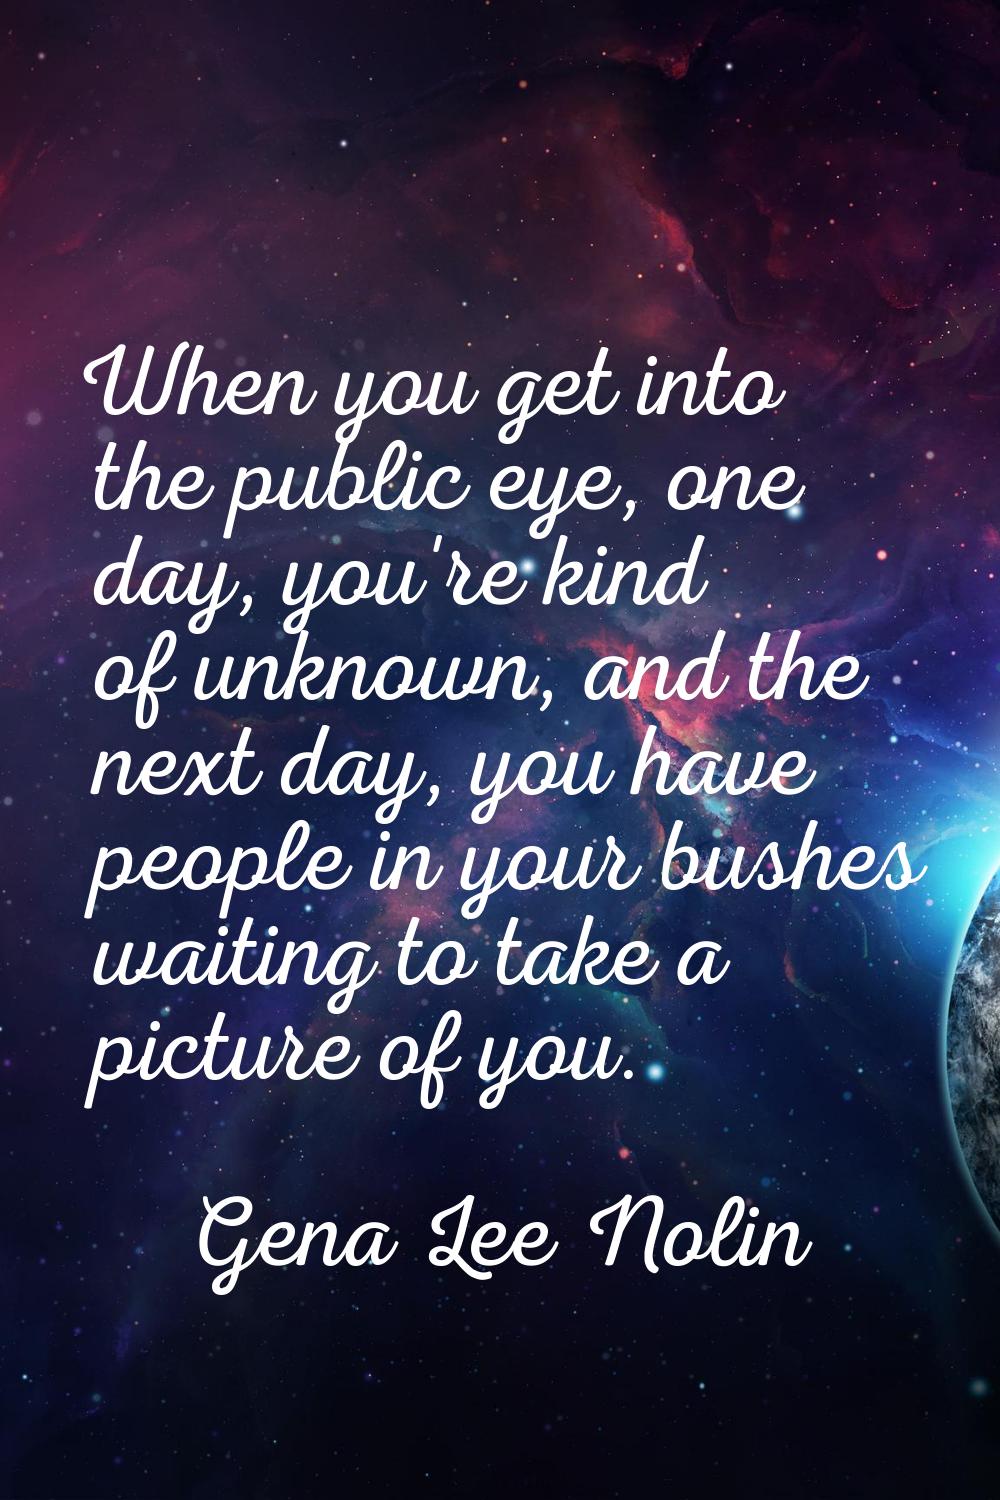 When you get into the public eye, one day, you're kind of unknown, and the next day, you have peopl